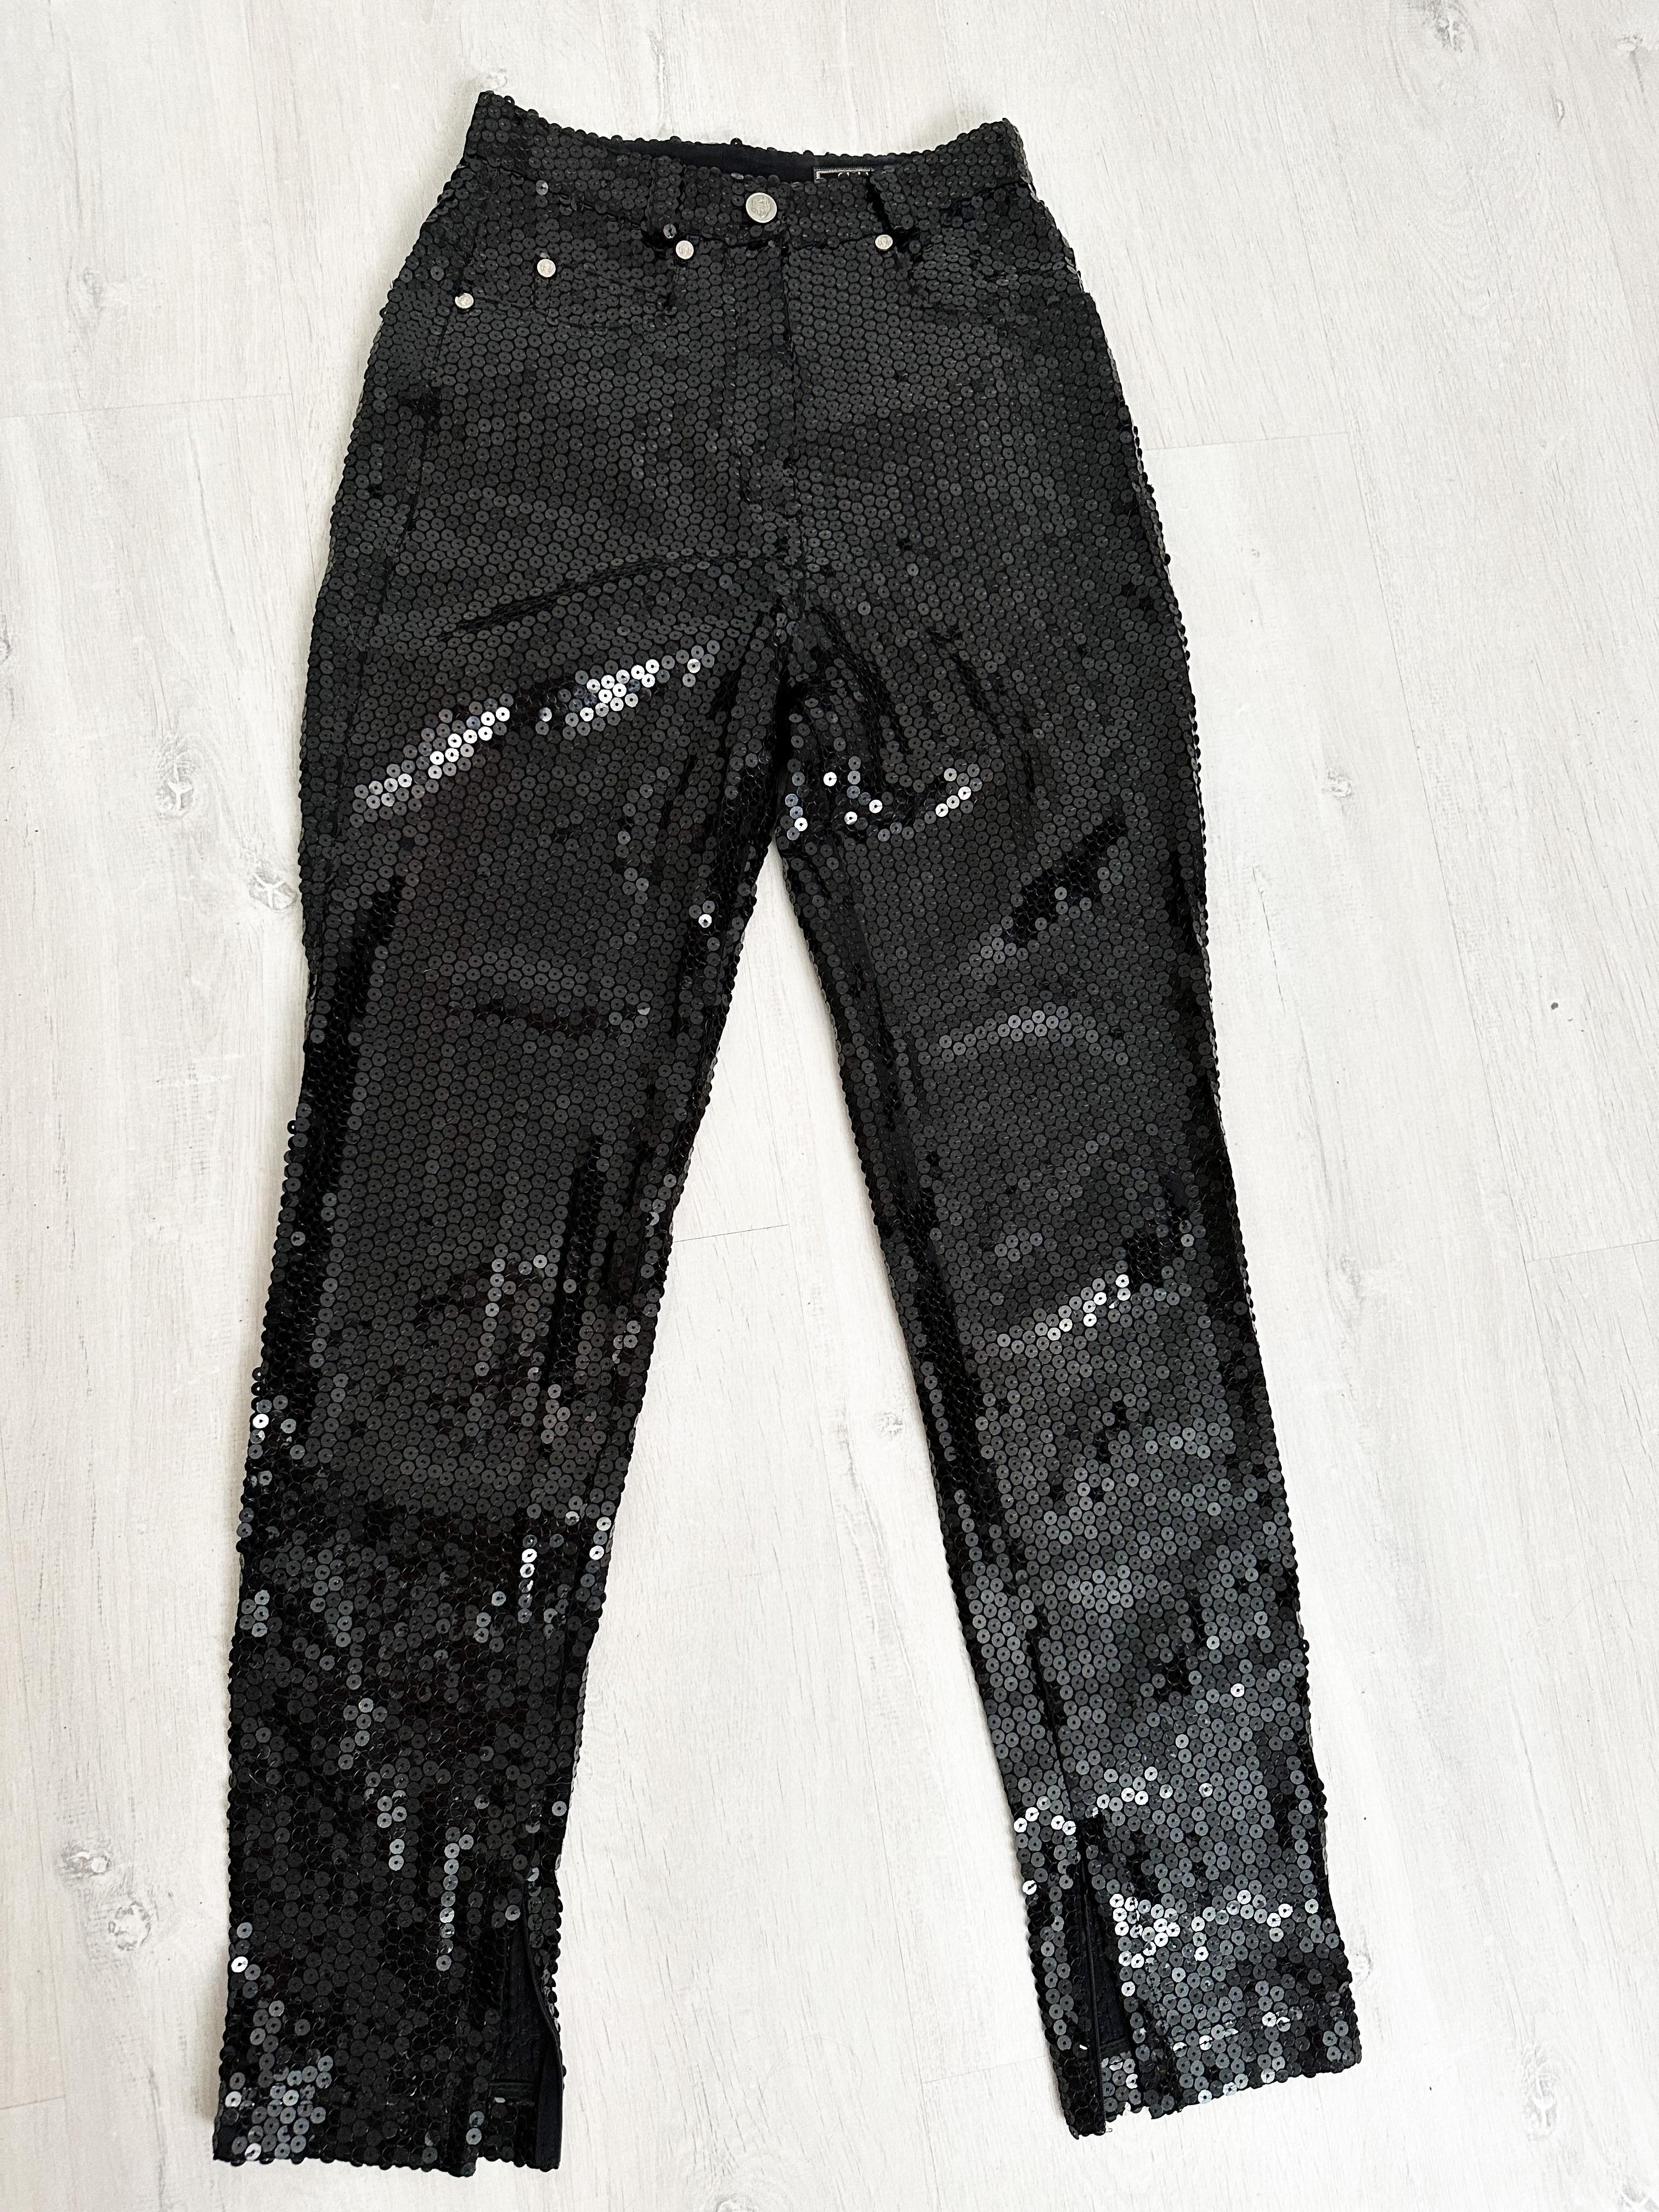 Gianni Versace Couture 1999 black runway sequin pants For Sale 6